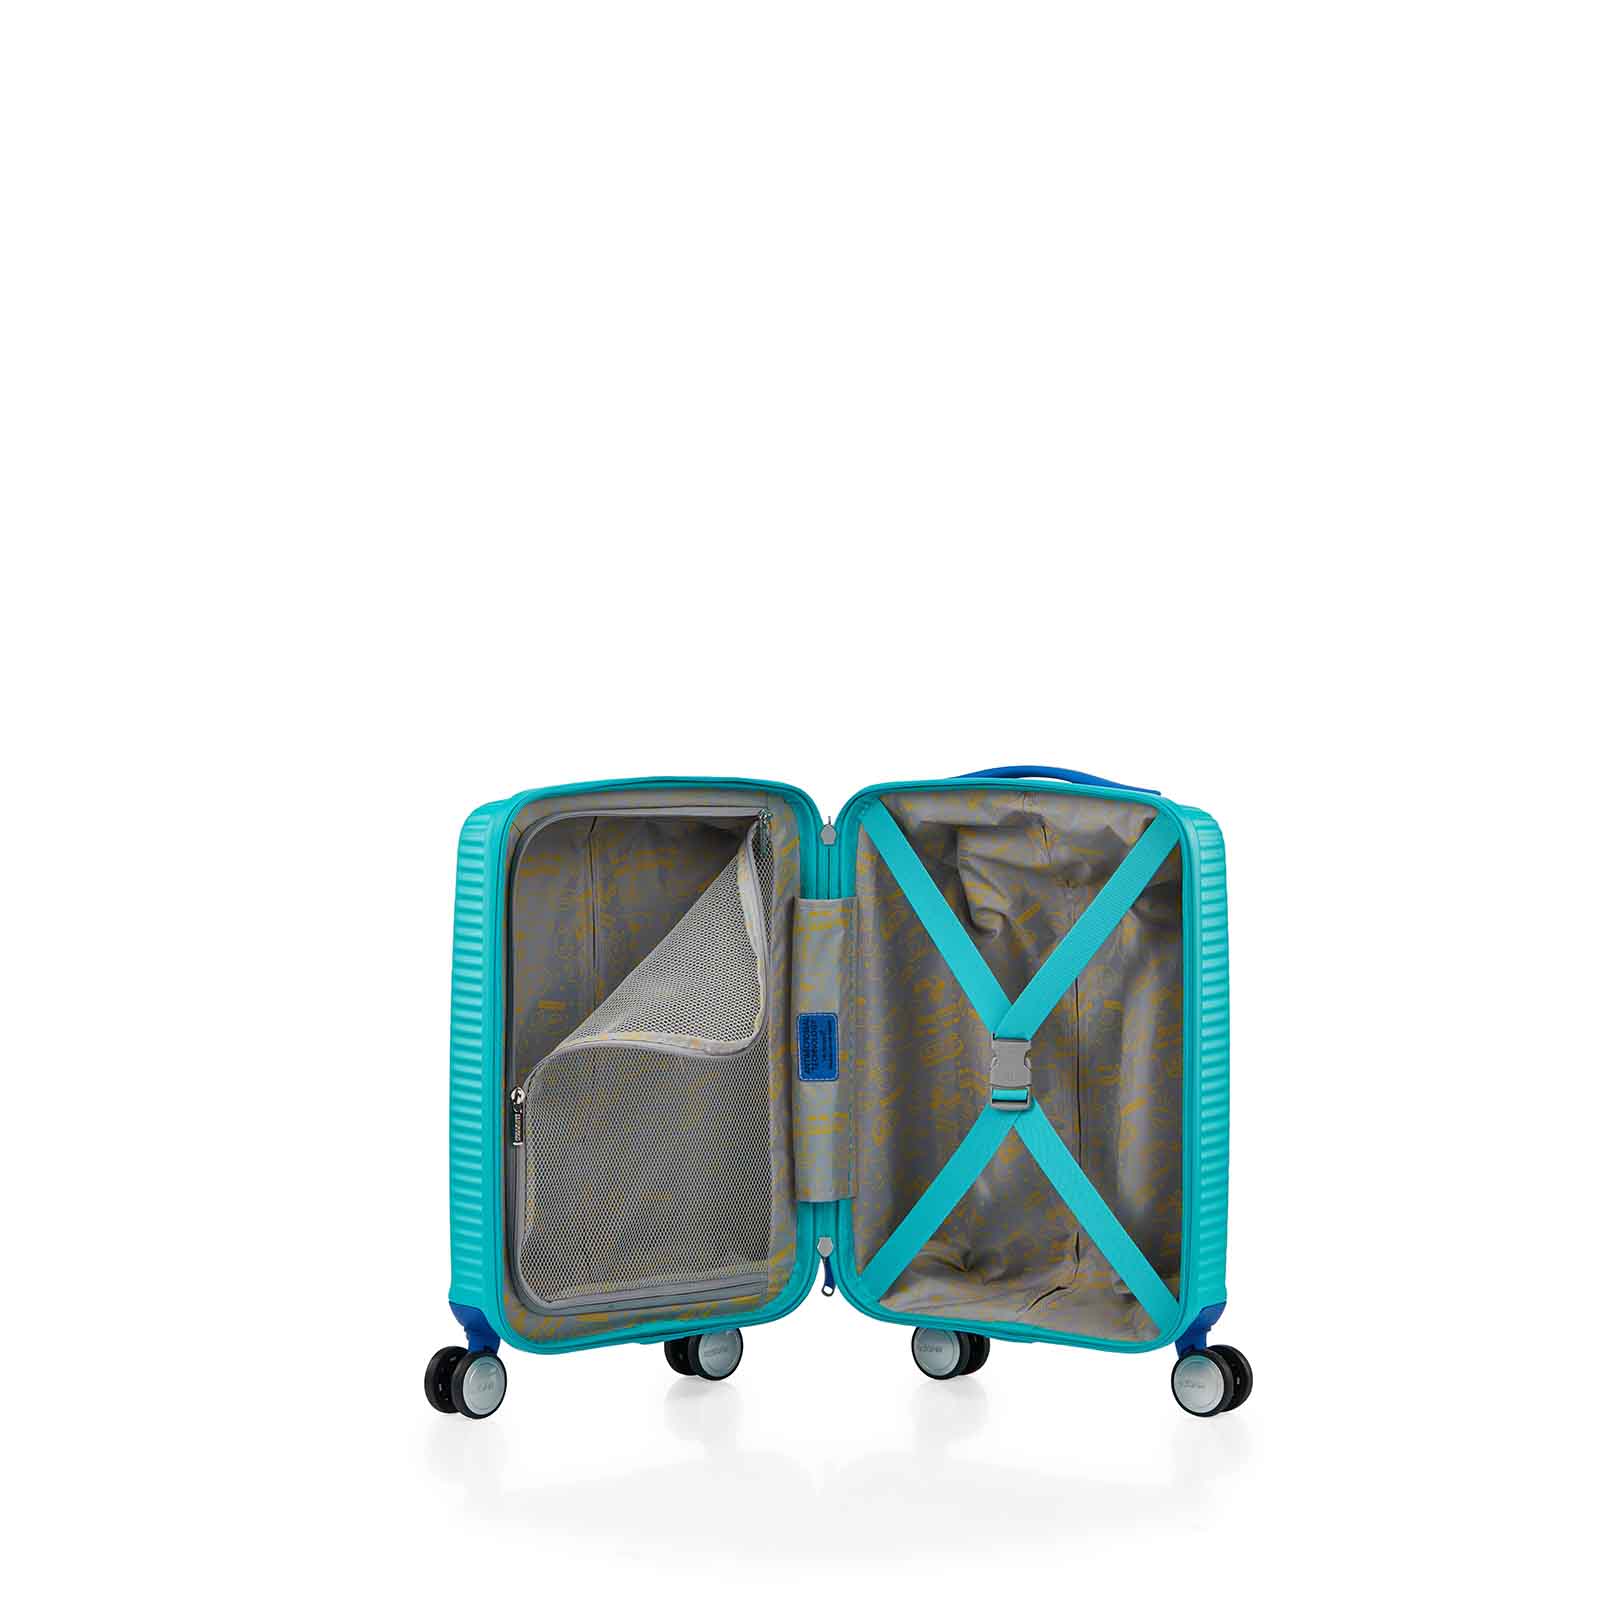 American-Tourister-Little-Curio-47cm-Carry-On-Suitcase-Teal-Blue-Open